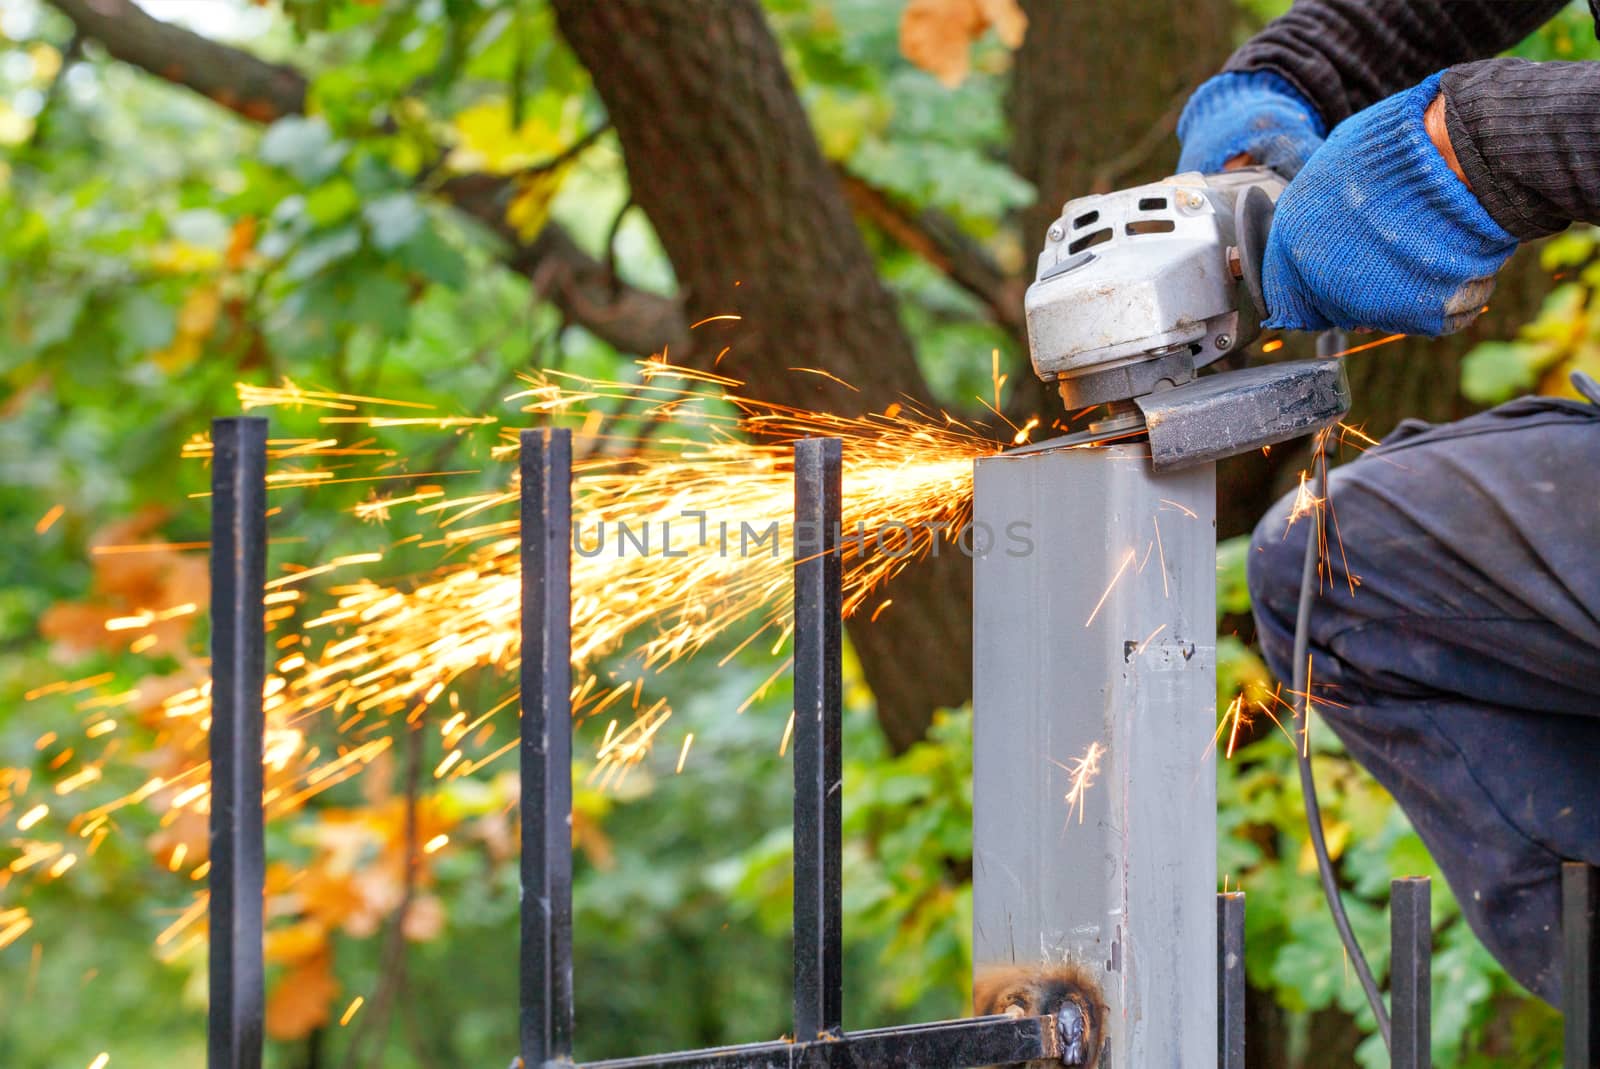 Craftsman cuts metal pillar metal with disc angle grinder on blurred background of green park. by Sergii